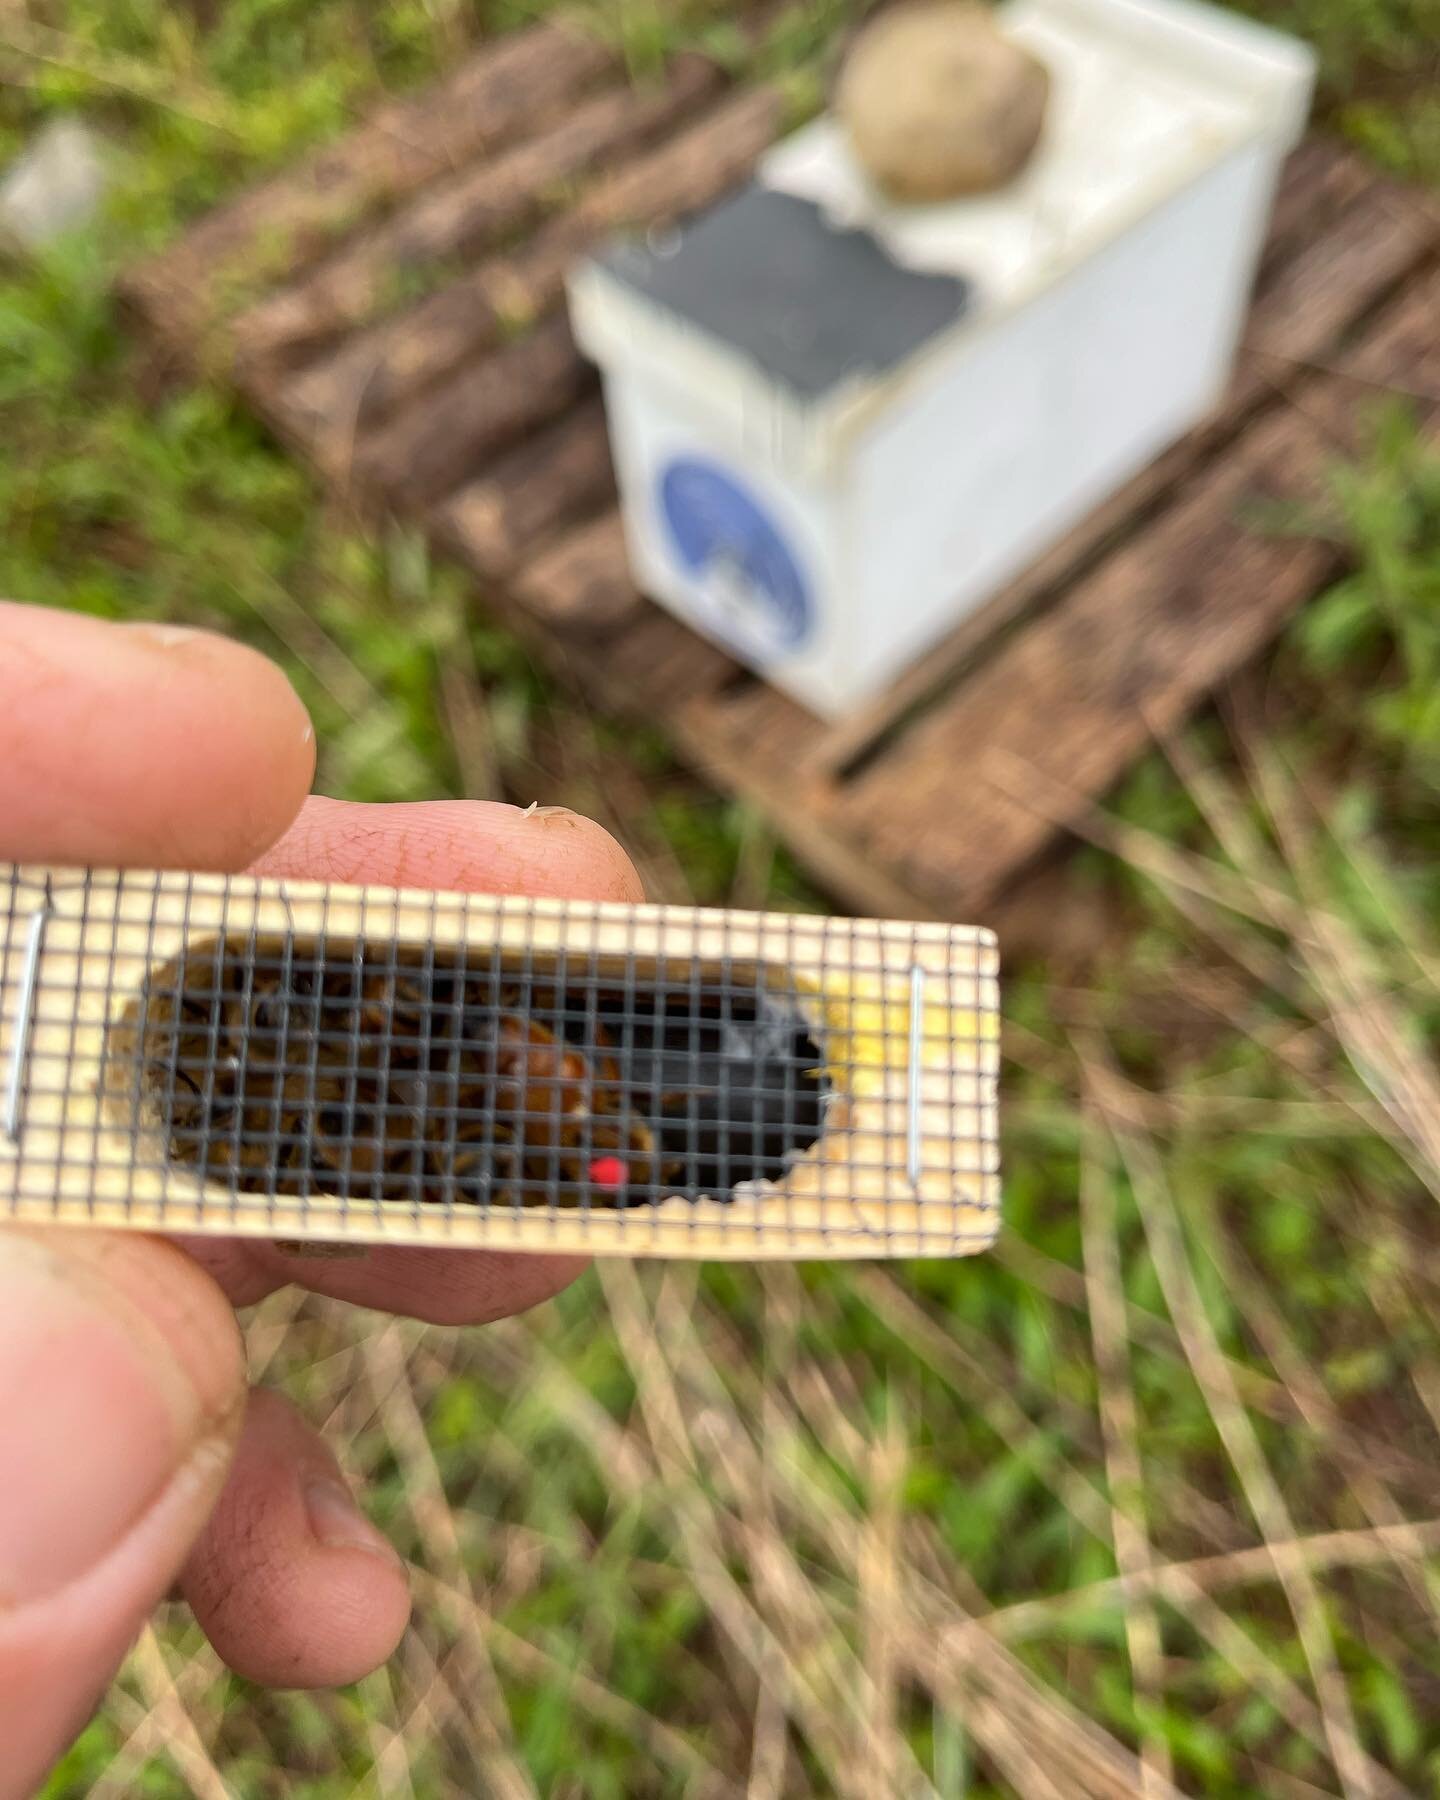 Queen bees and King blossoms.  This time of year we make &ldquo;early splits&rdquo; from strong overwintered colonies.  In doing so we pull five frames of bees, brood, and resources out of the strong colony and put them into a five frame &ldquo;nuc b